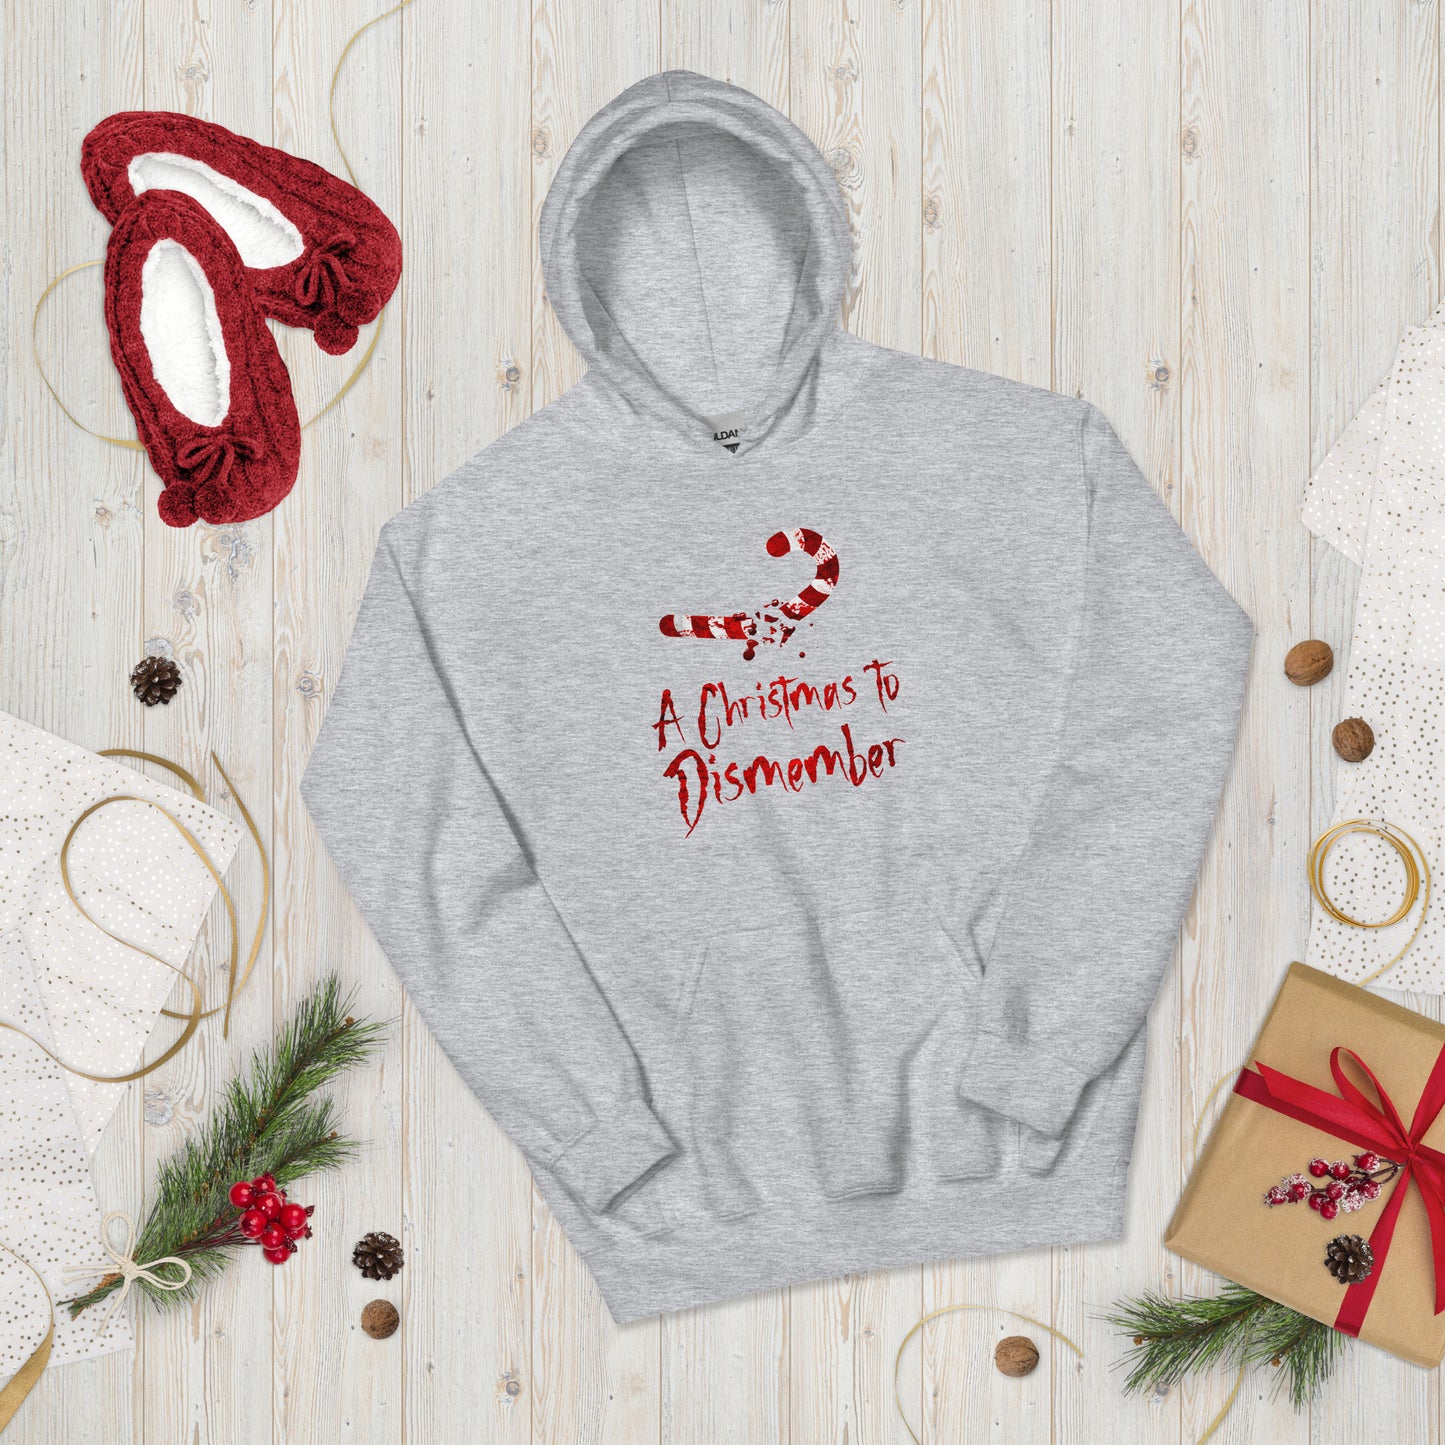 "A Christmas to Dismember" Unisex Hoodie